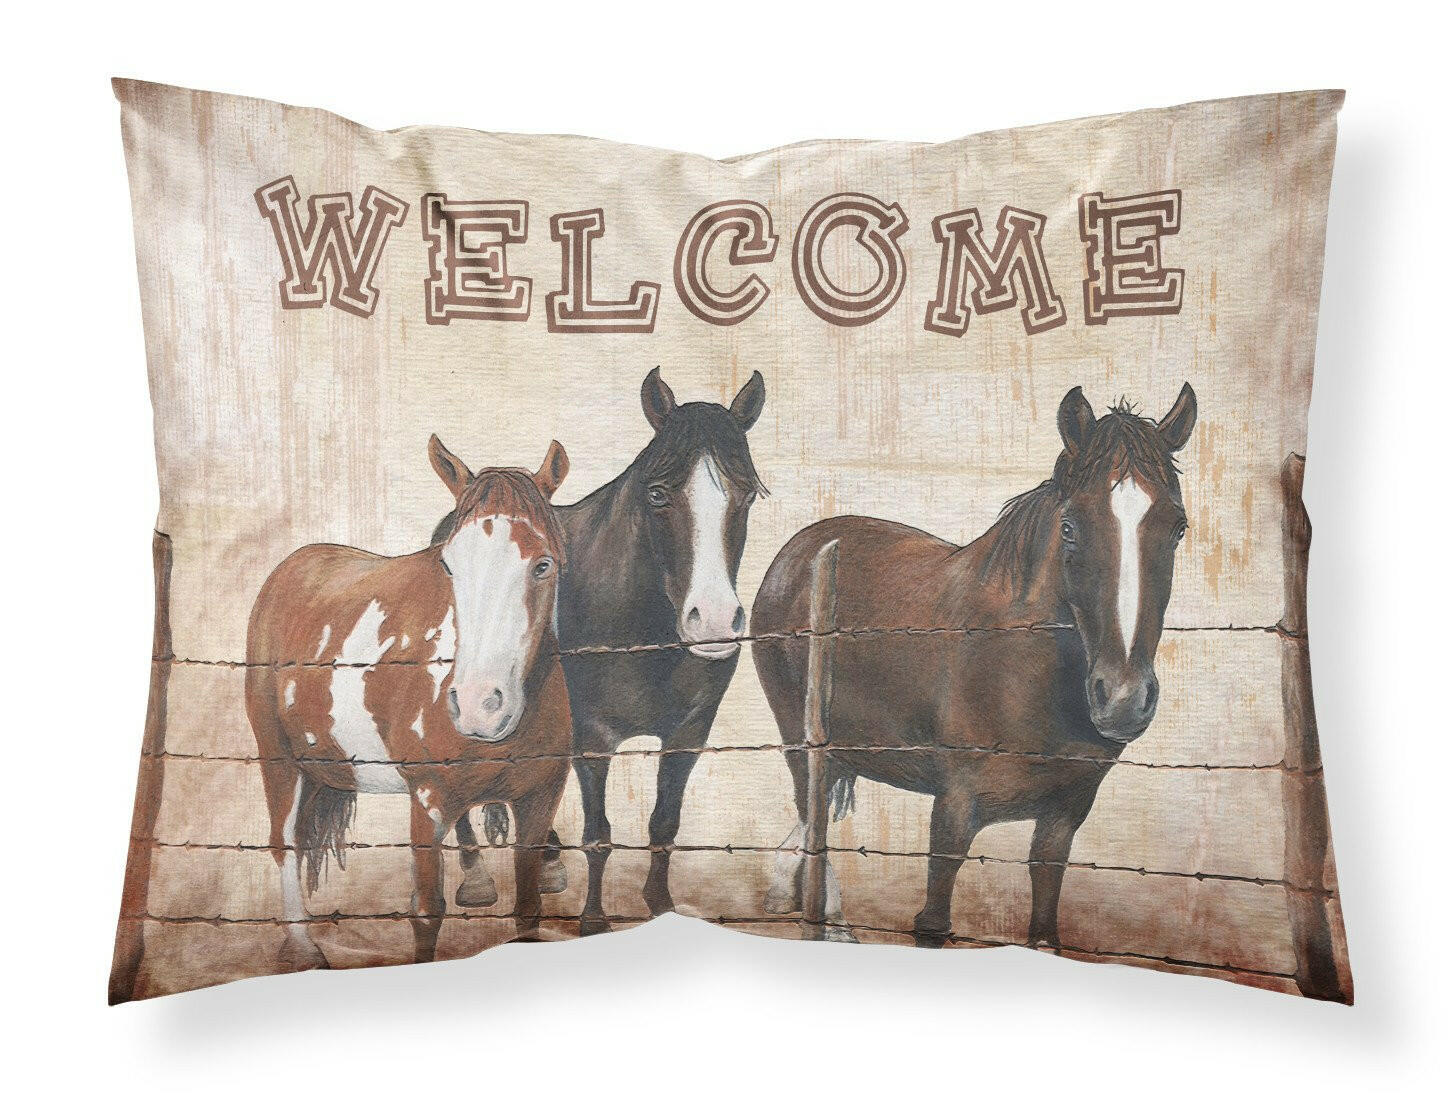 Welcome Mat with Horses Moisture wicking Fabric standard pillowcase SB3059PILLOWCASE by Caroline's Treasures